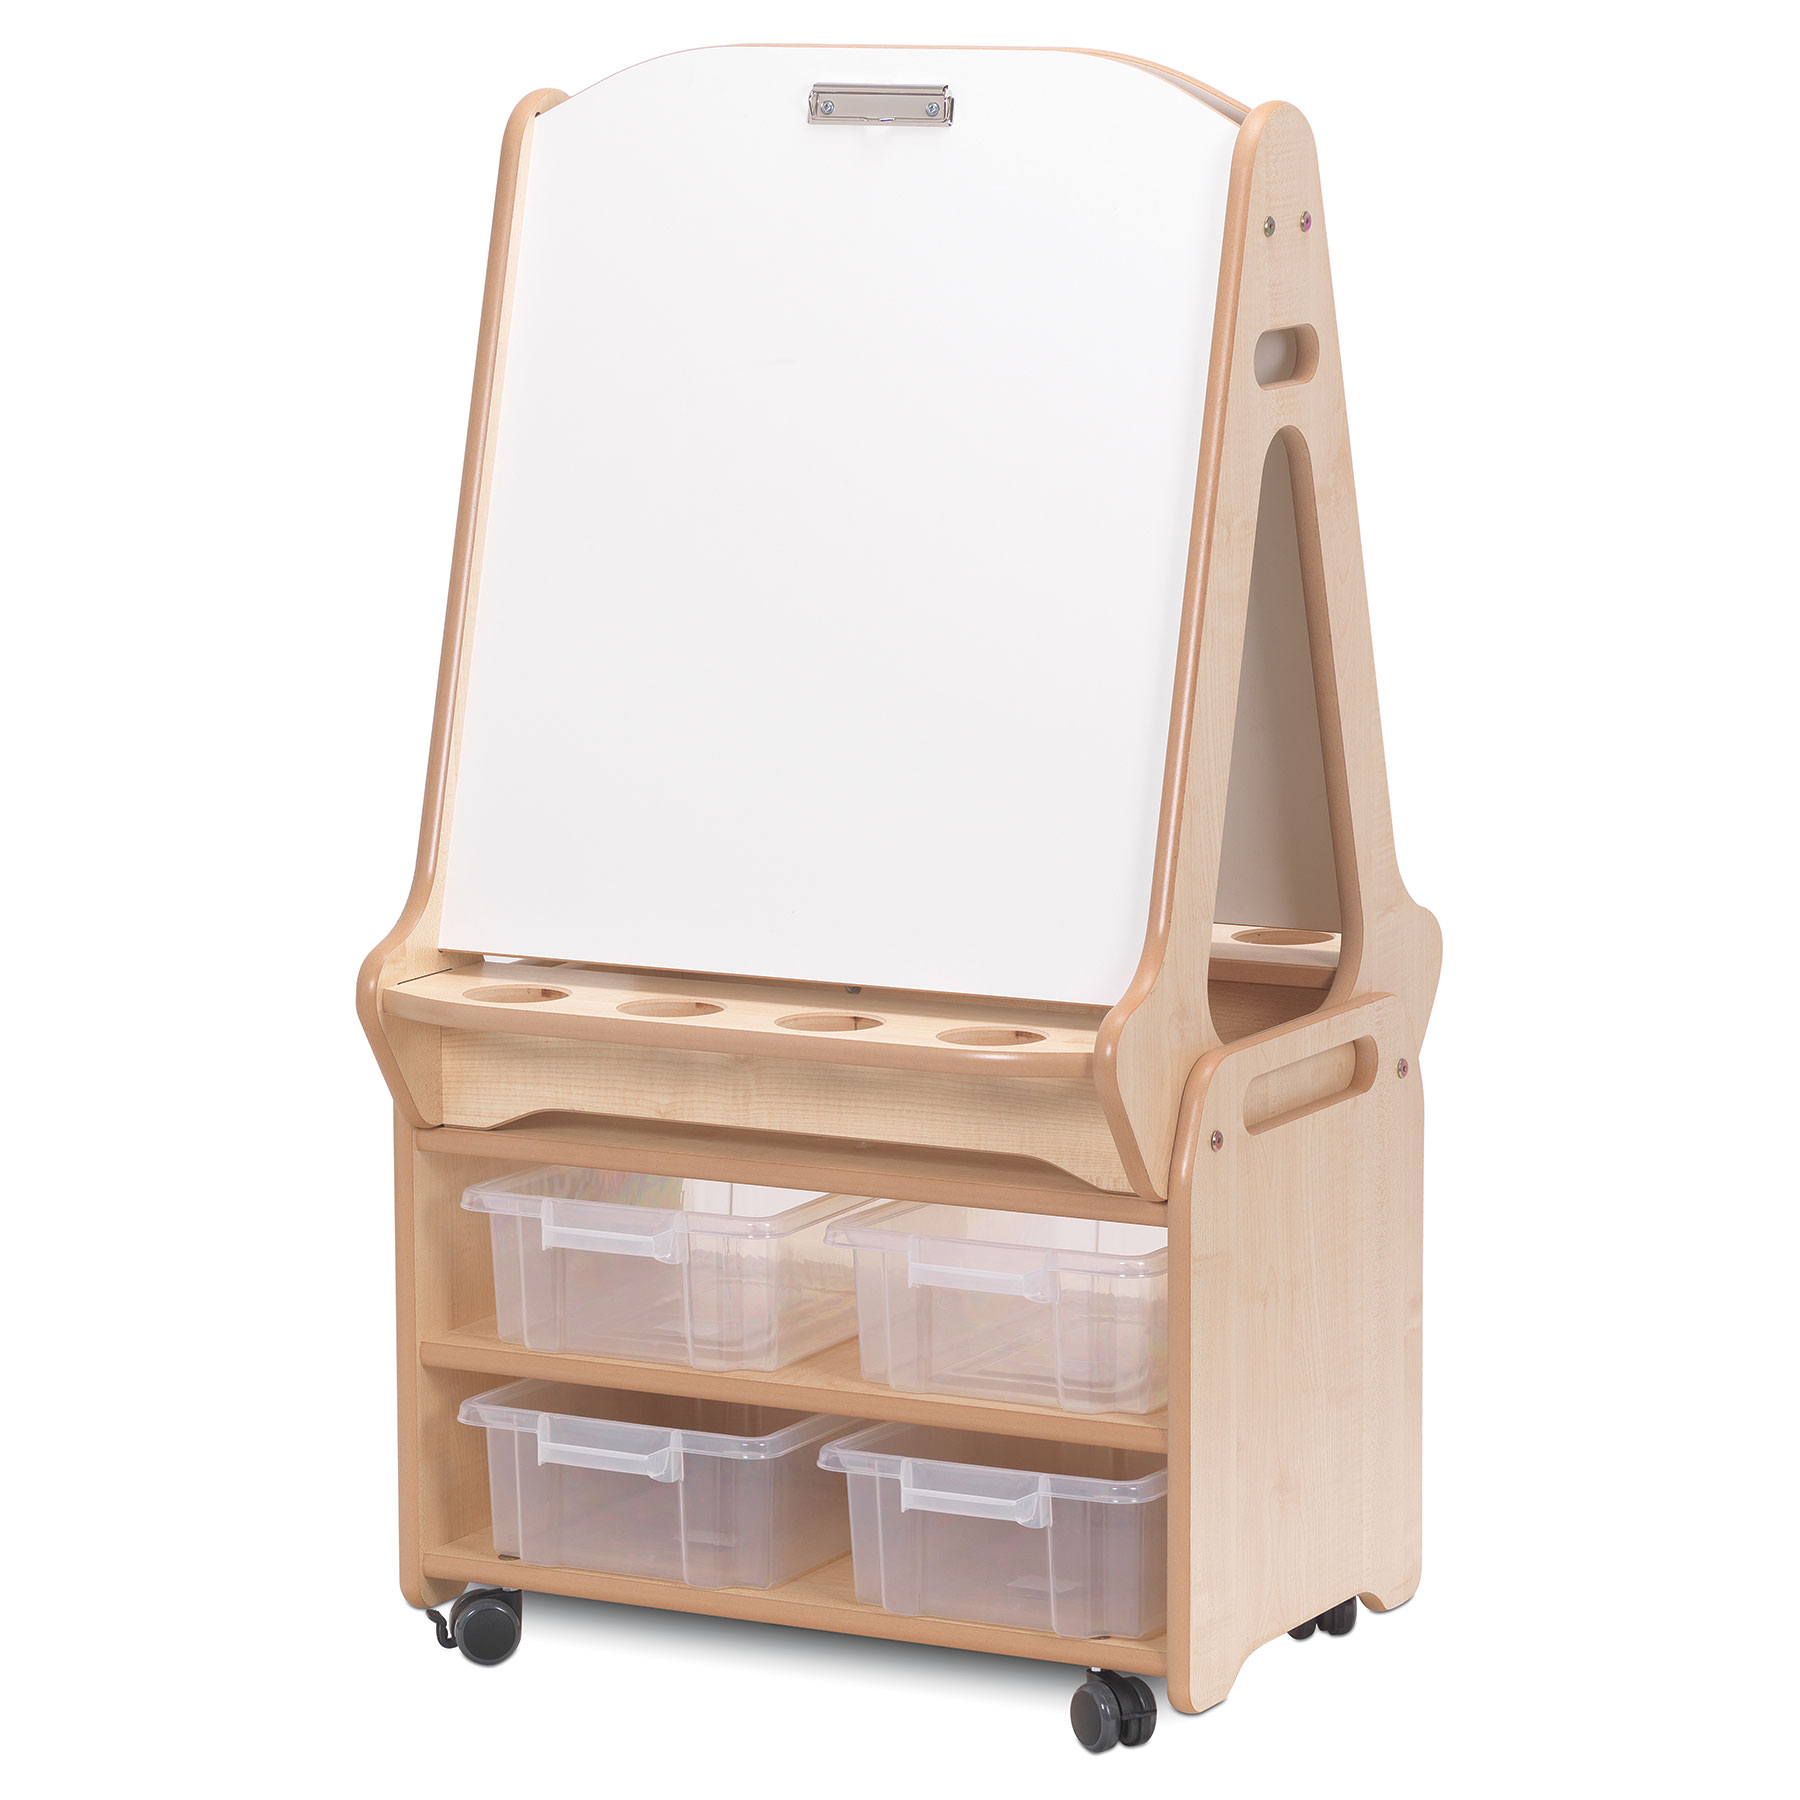 Double-sided 2 Station Whiteboard Easel with Tall Storage Trolley